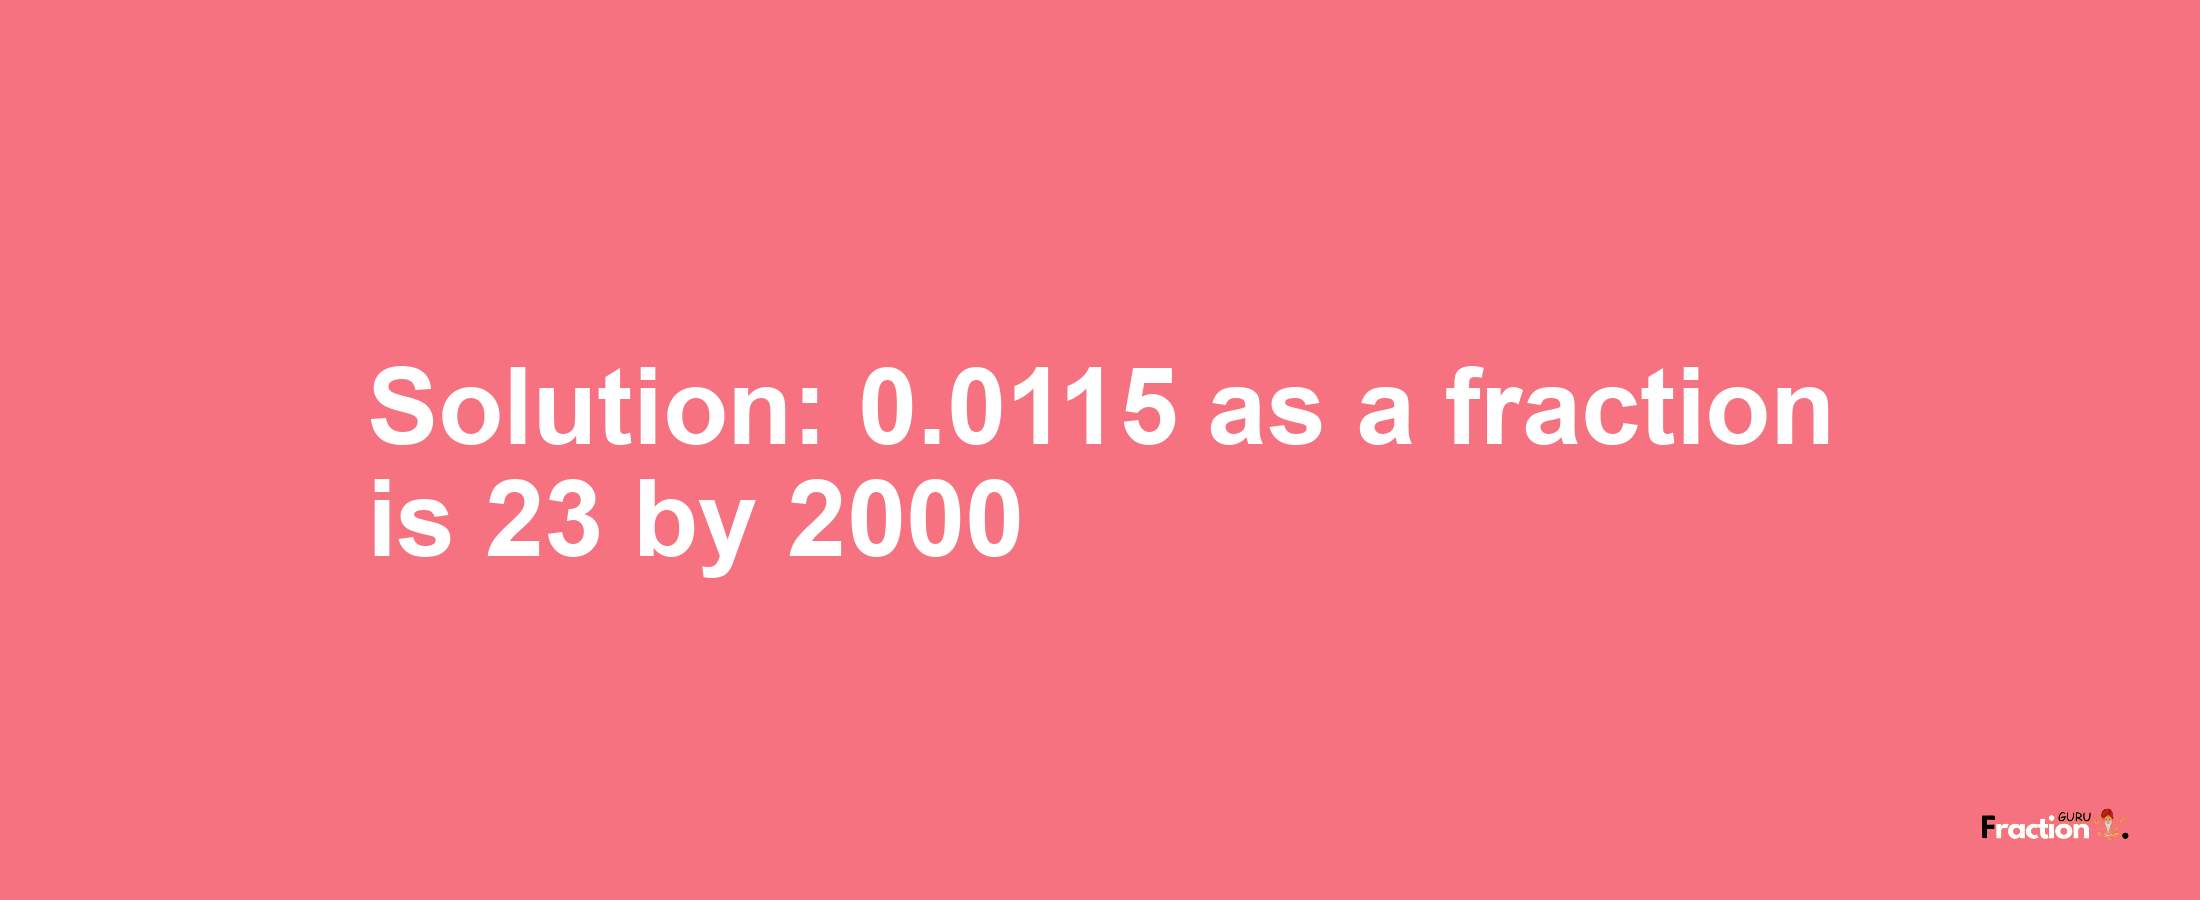 Solution:0.0115 as a fraction is 23/2000